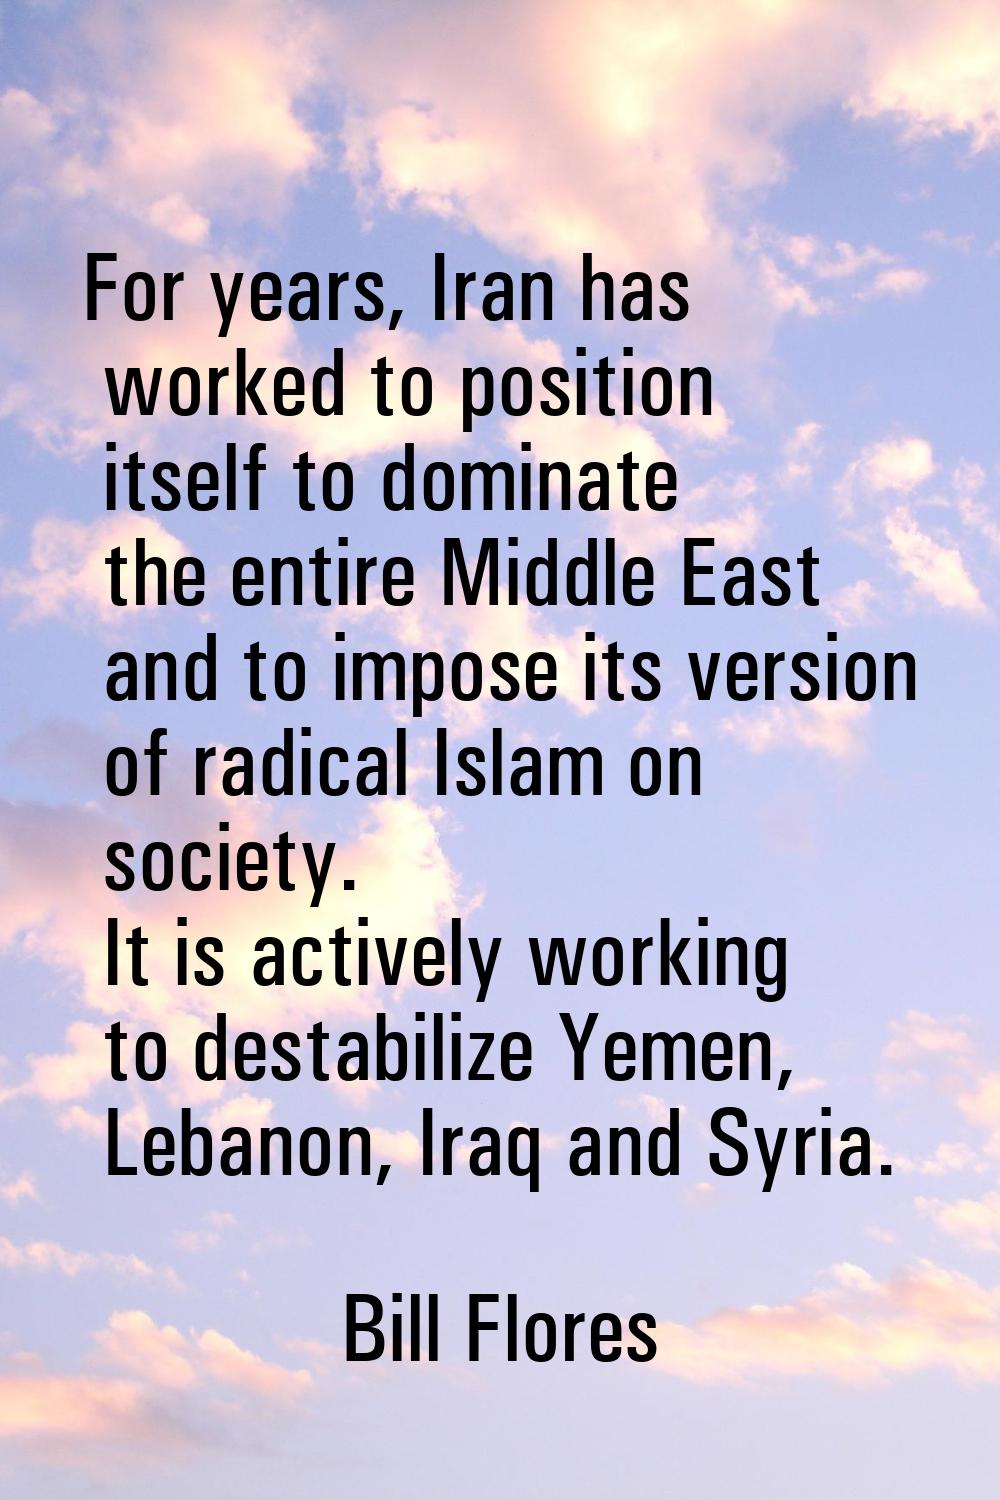 For years, Iran has worked to position itself to dominate the entire Middle East and to impose its 